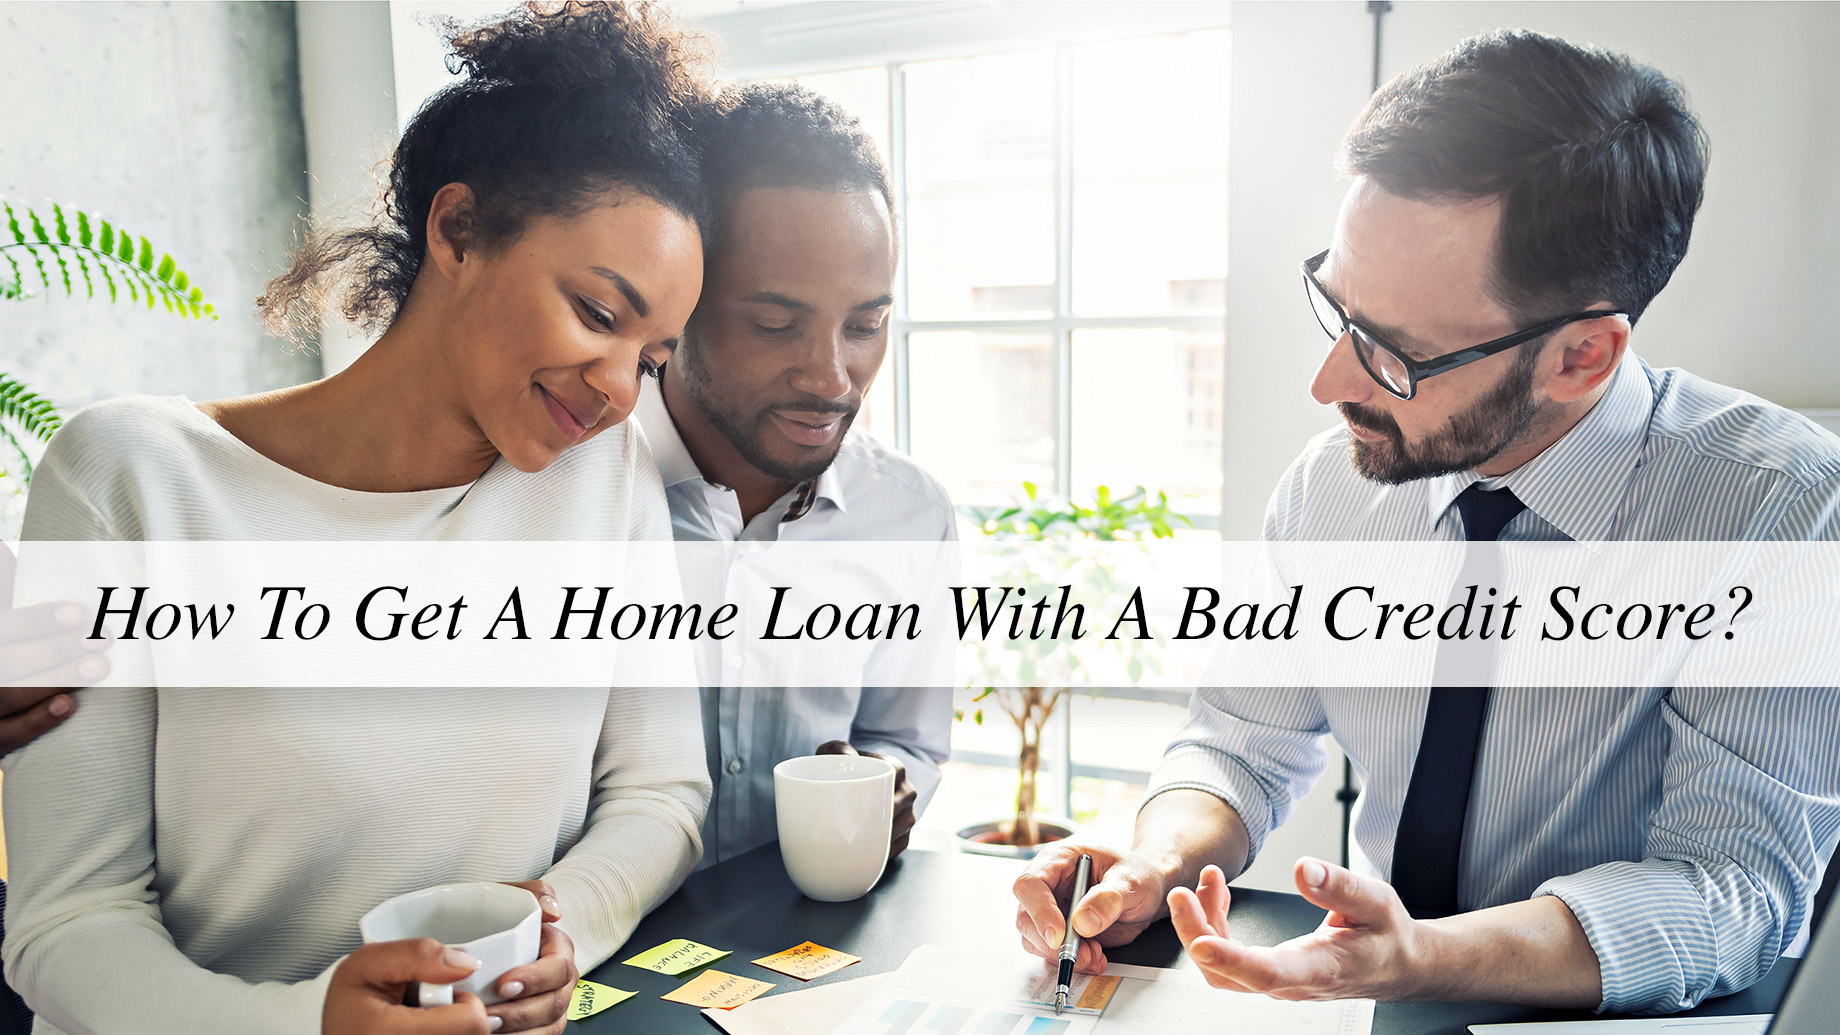 How To Get A Home Loan With A Bad Credit Score?